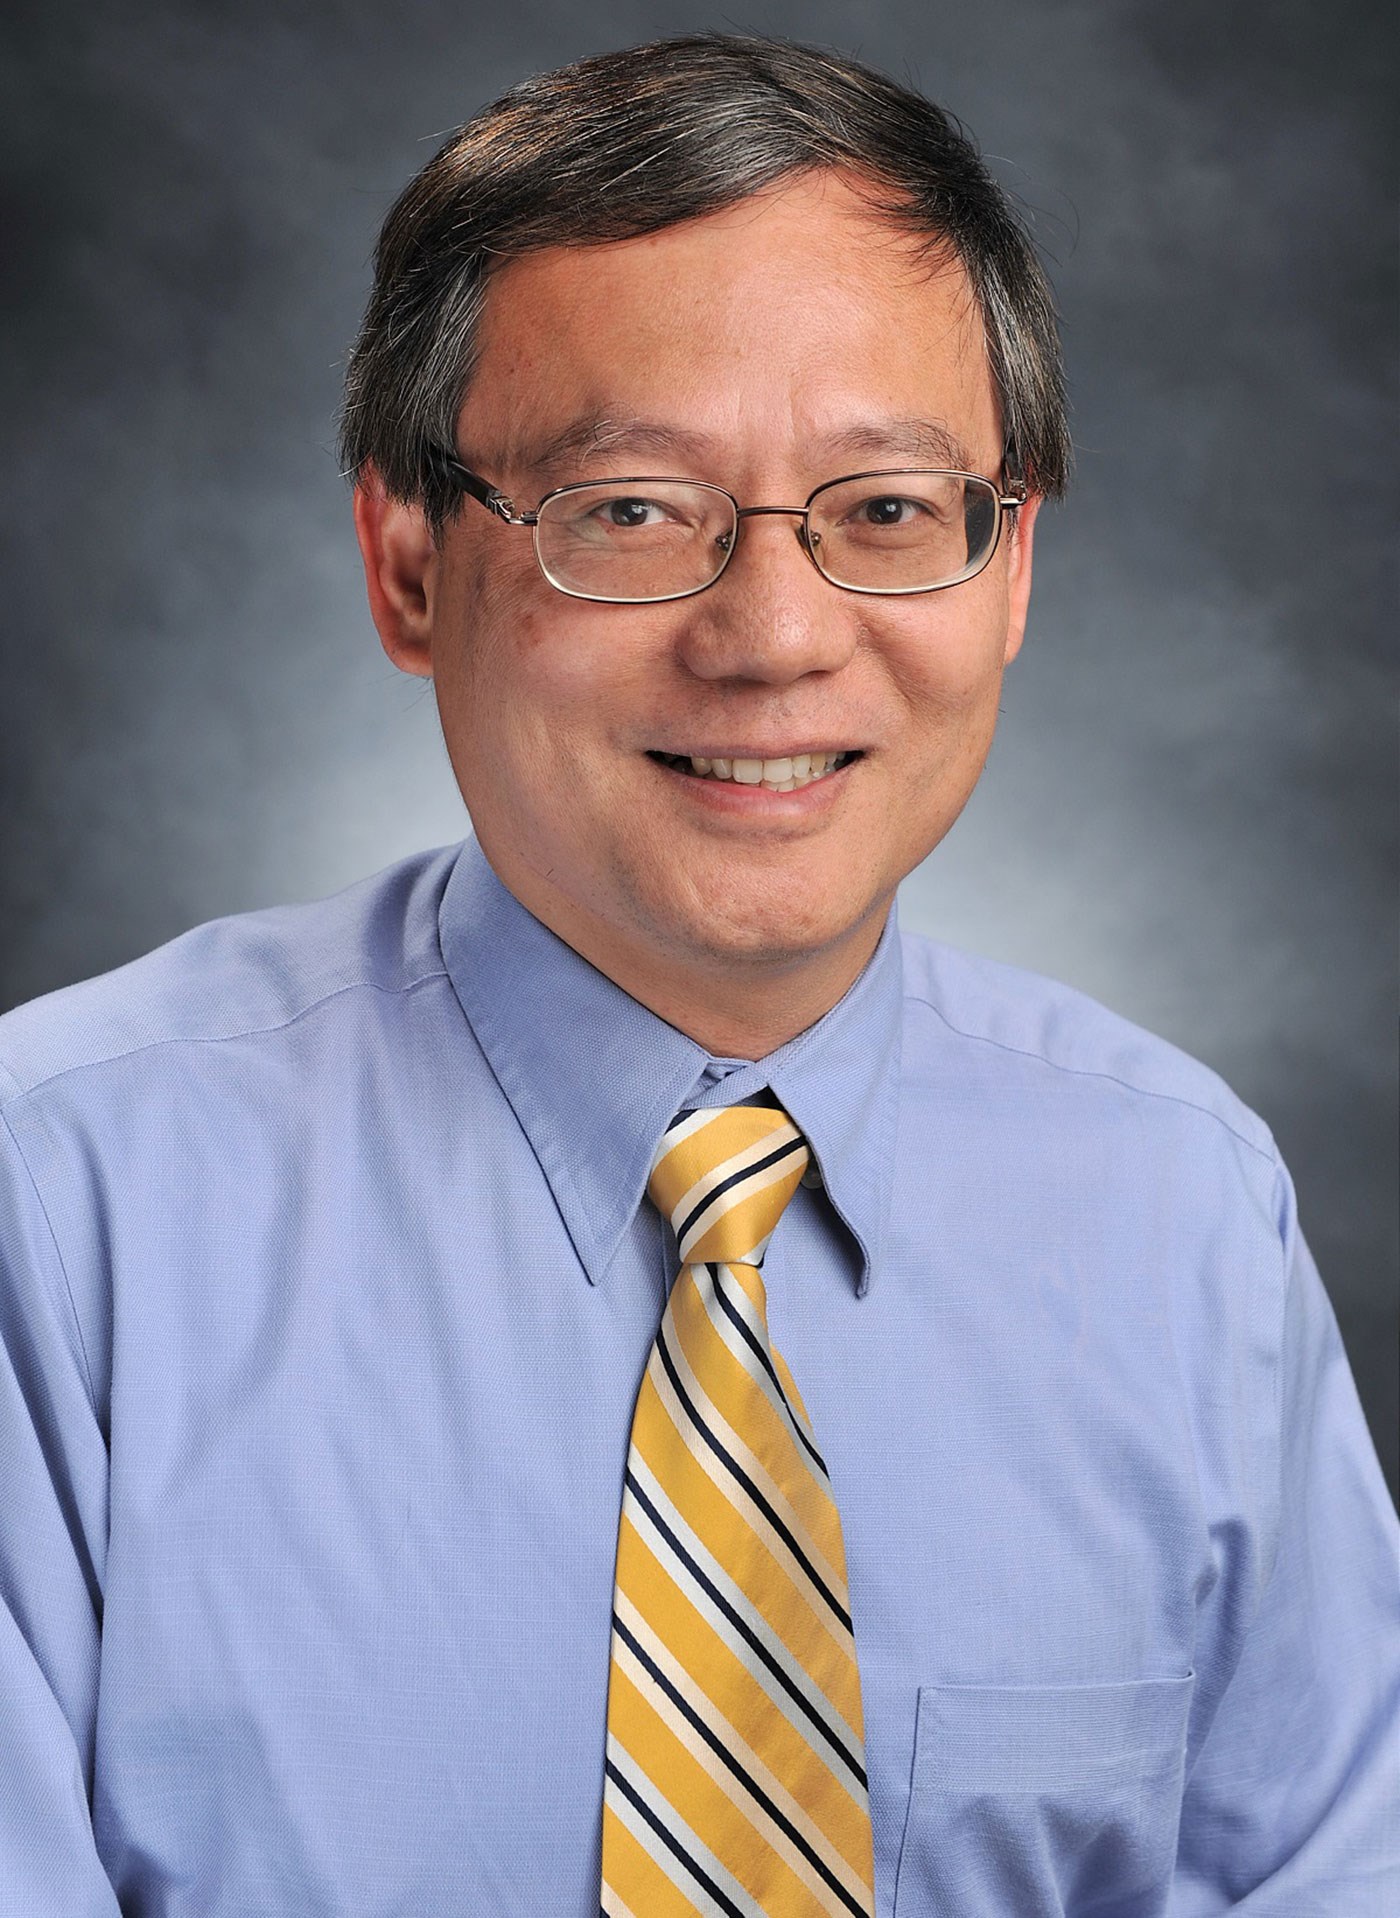 Hwai-Chen Guo is a Professor in the Biological Sciences Department at UMass Lowell.